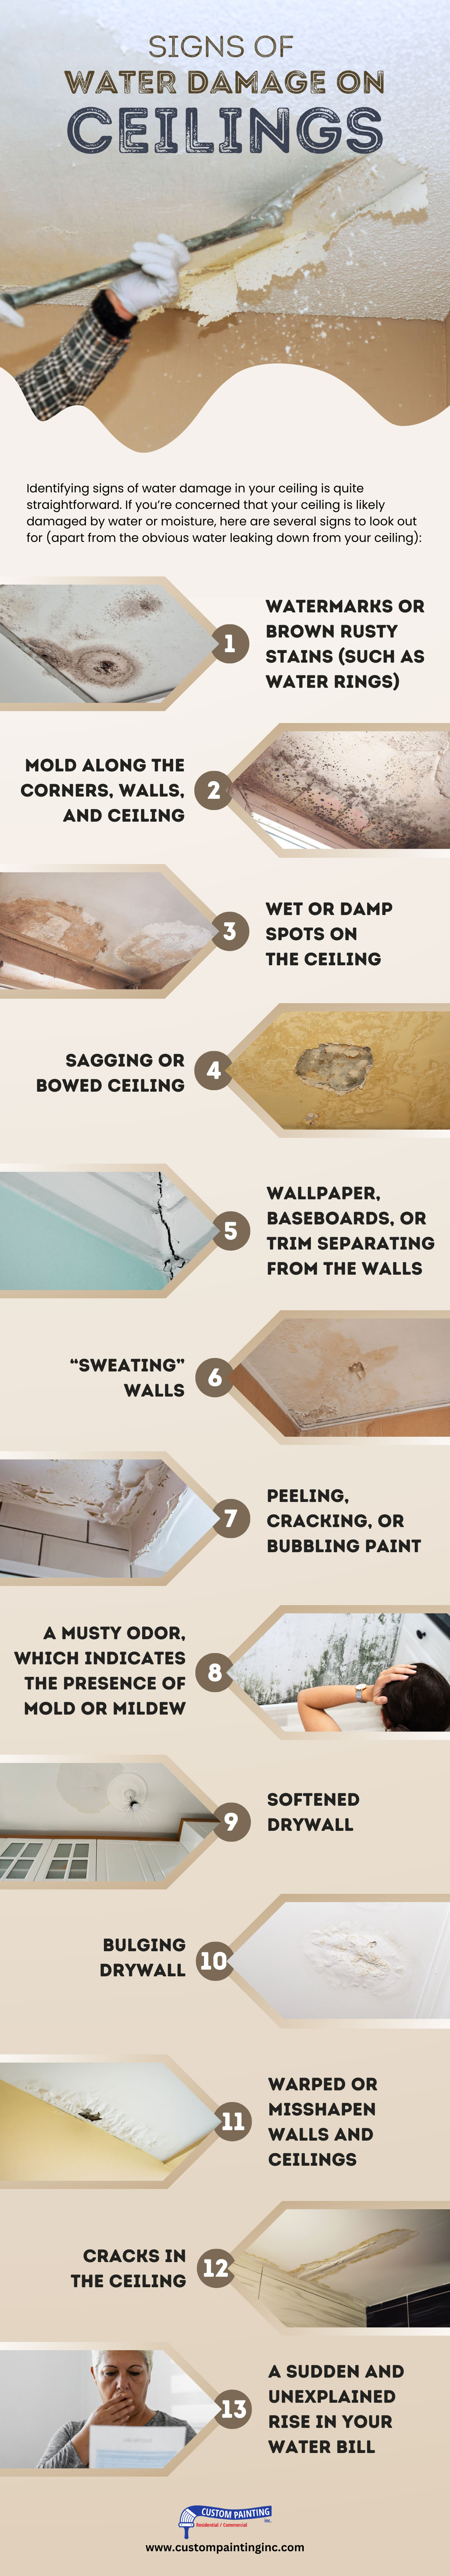 Signs of water damage on ceilings